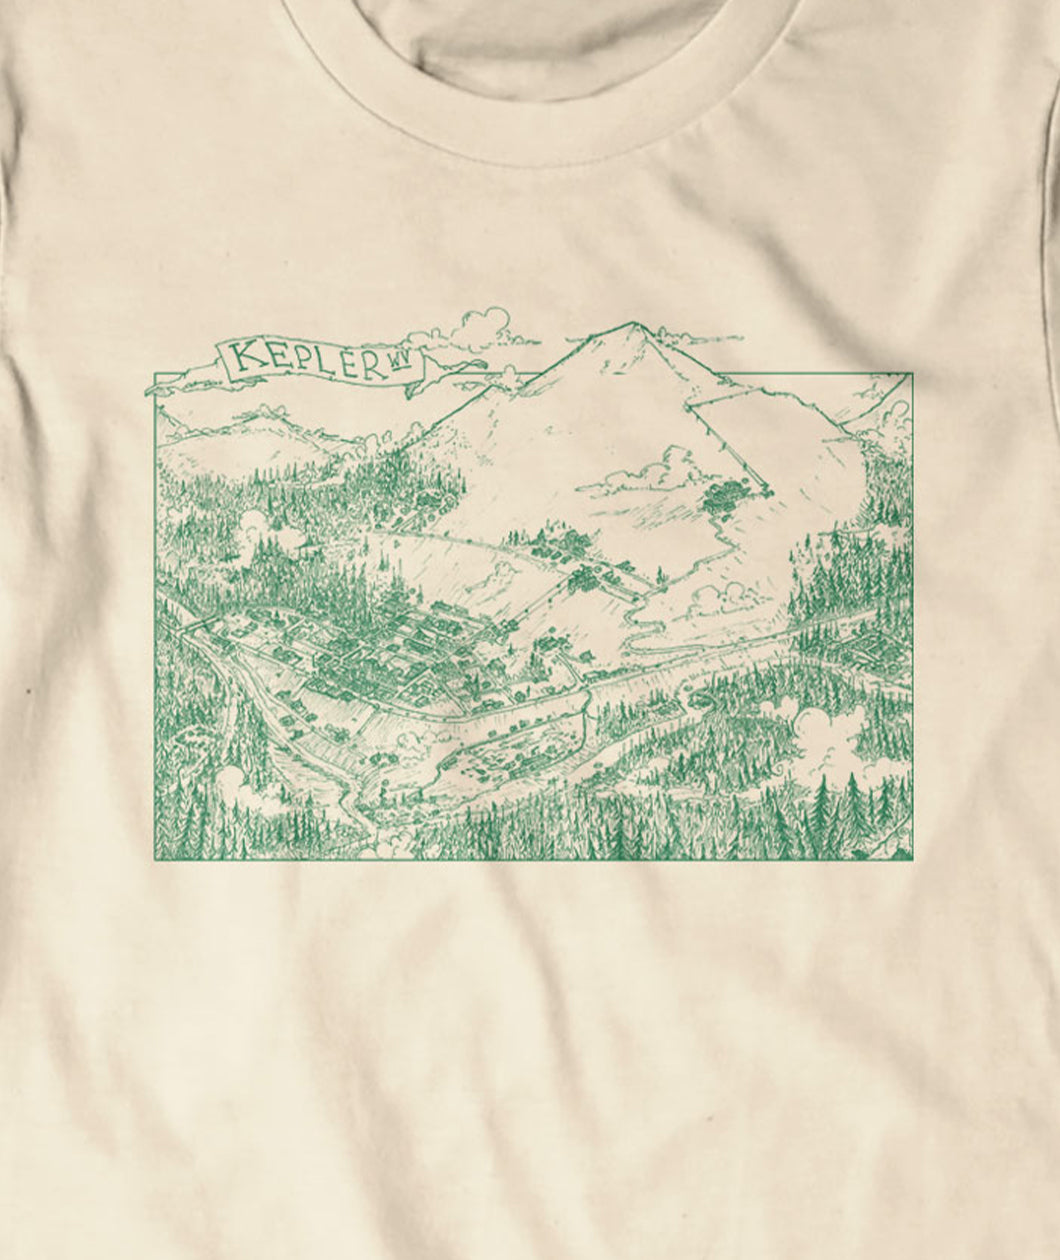 An upclose shot of a cream colored teeshirt. The illustration fills the frame. It is a green line drawing of a town sandwiched between a tall mountain and a sprawling forest. There is a funicular running up the mountain. At the top of the illustration is a banner that says "Kepler WV".